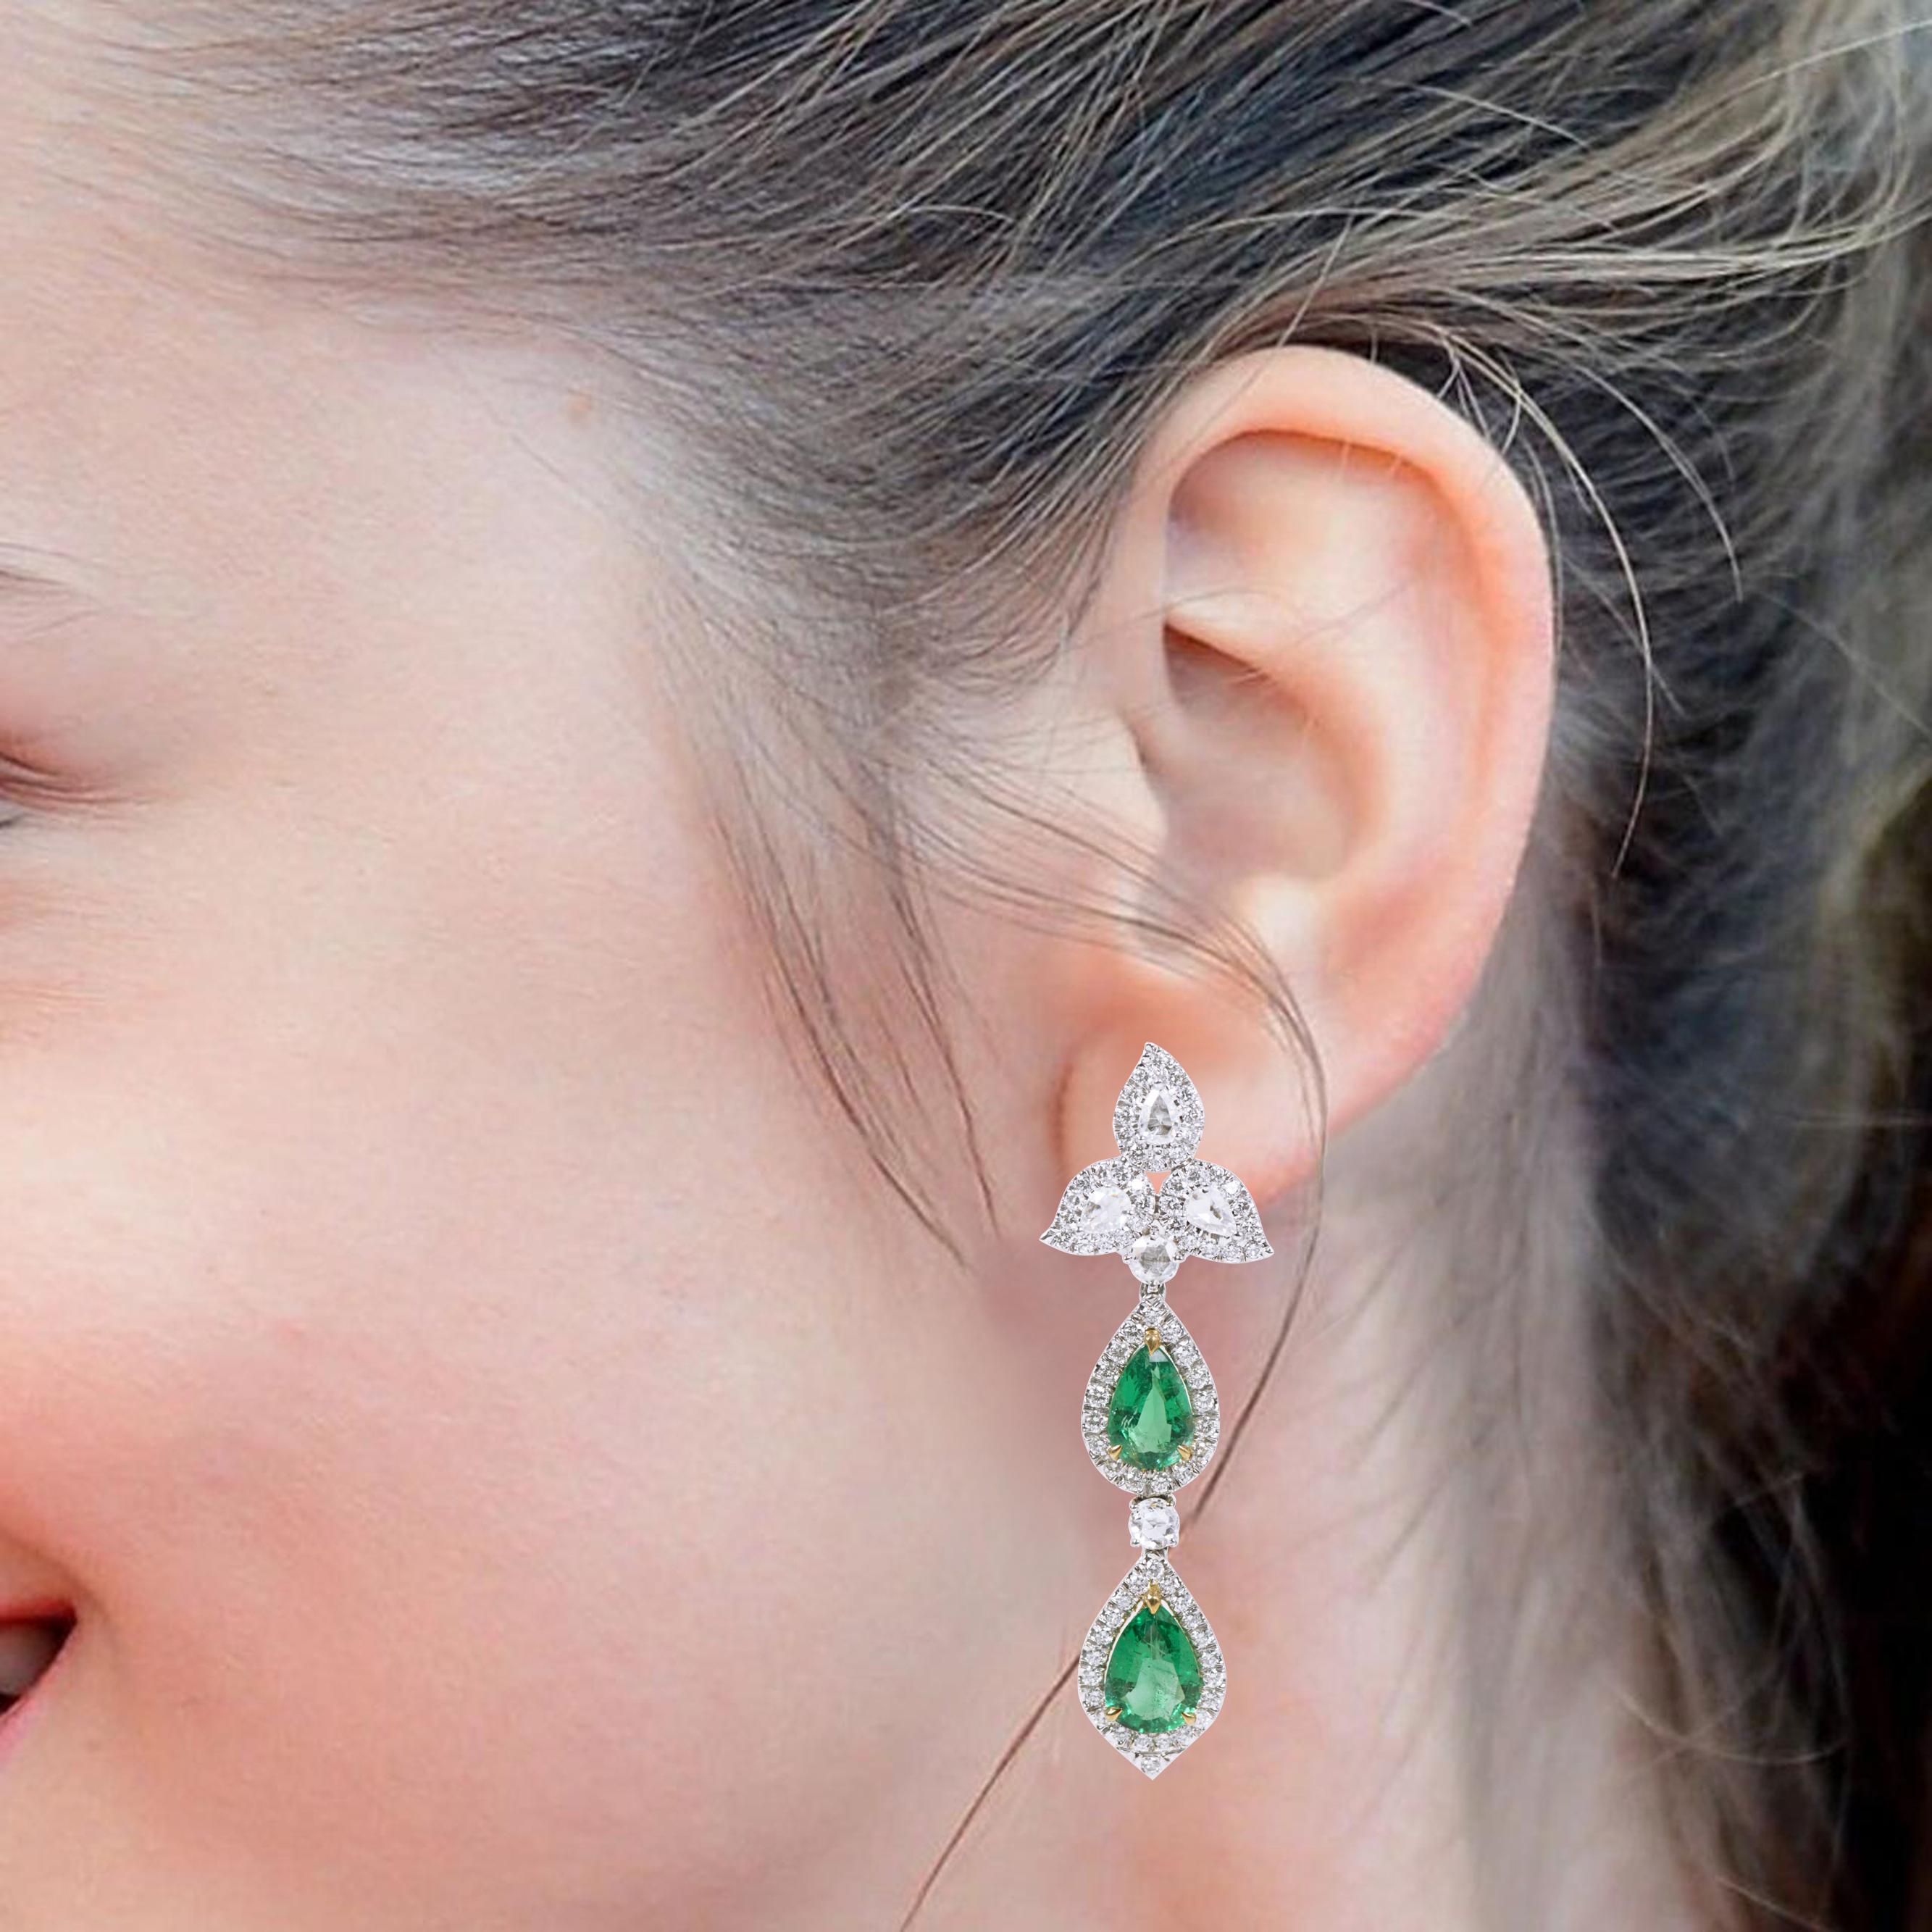 18 Karat White Gold 10.46 Carat Natural Emerald and Diamond Dangle Earrings

This gorgeous vivid green emerald and diamond rose cut long earring is fascinating. The bottom is amicably formed with solitaire pear shaped emerald in yellow gold three